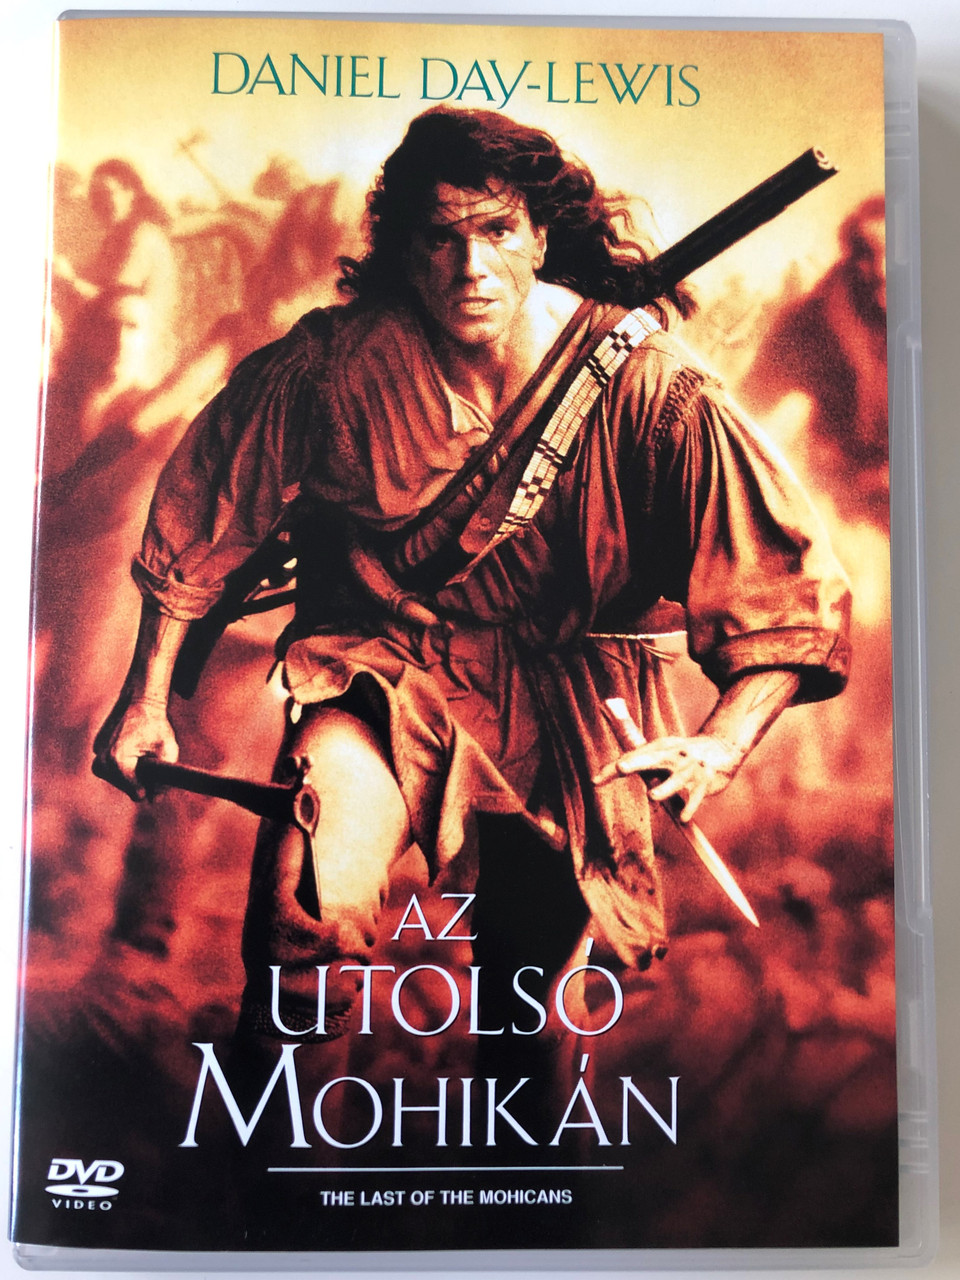 The last of the Mohicans - Az utolsó Mohikán DVD 1992 / Directed by Michael  Mann / Starring: Daniel Day-Lewis, Madeline Stowe, Johdi May -  bibleinmylanguage